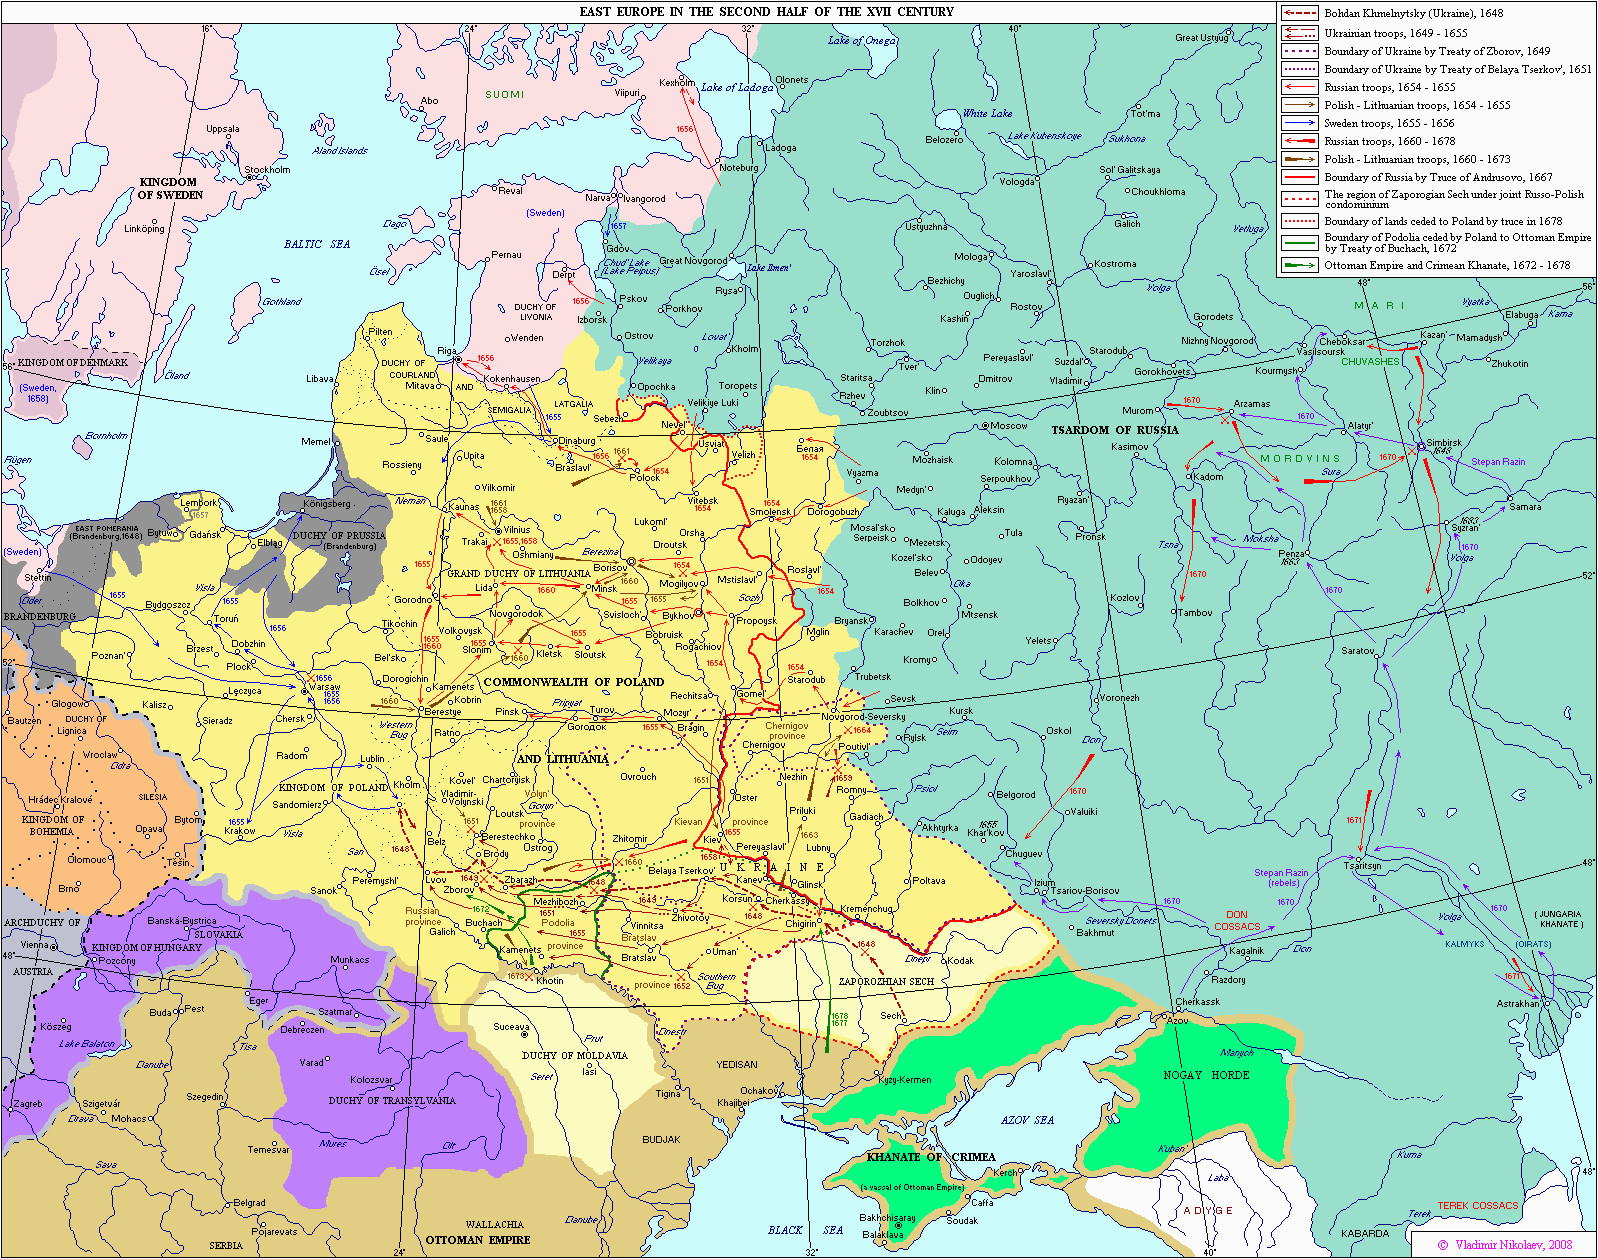 Map Of Eastern Europe 1940 Eastern Europe In Second Half Of the 17th Century Maps and